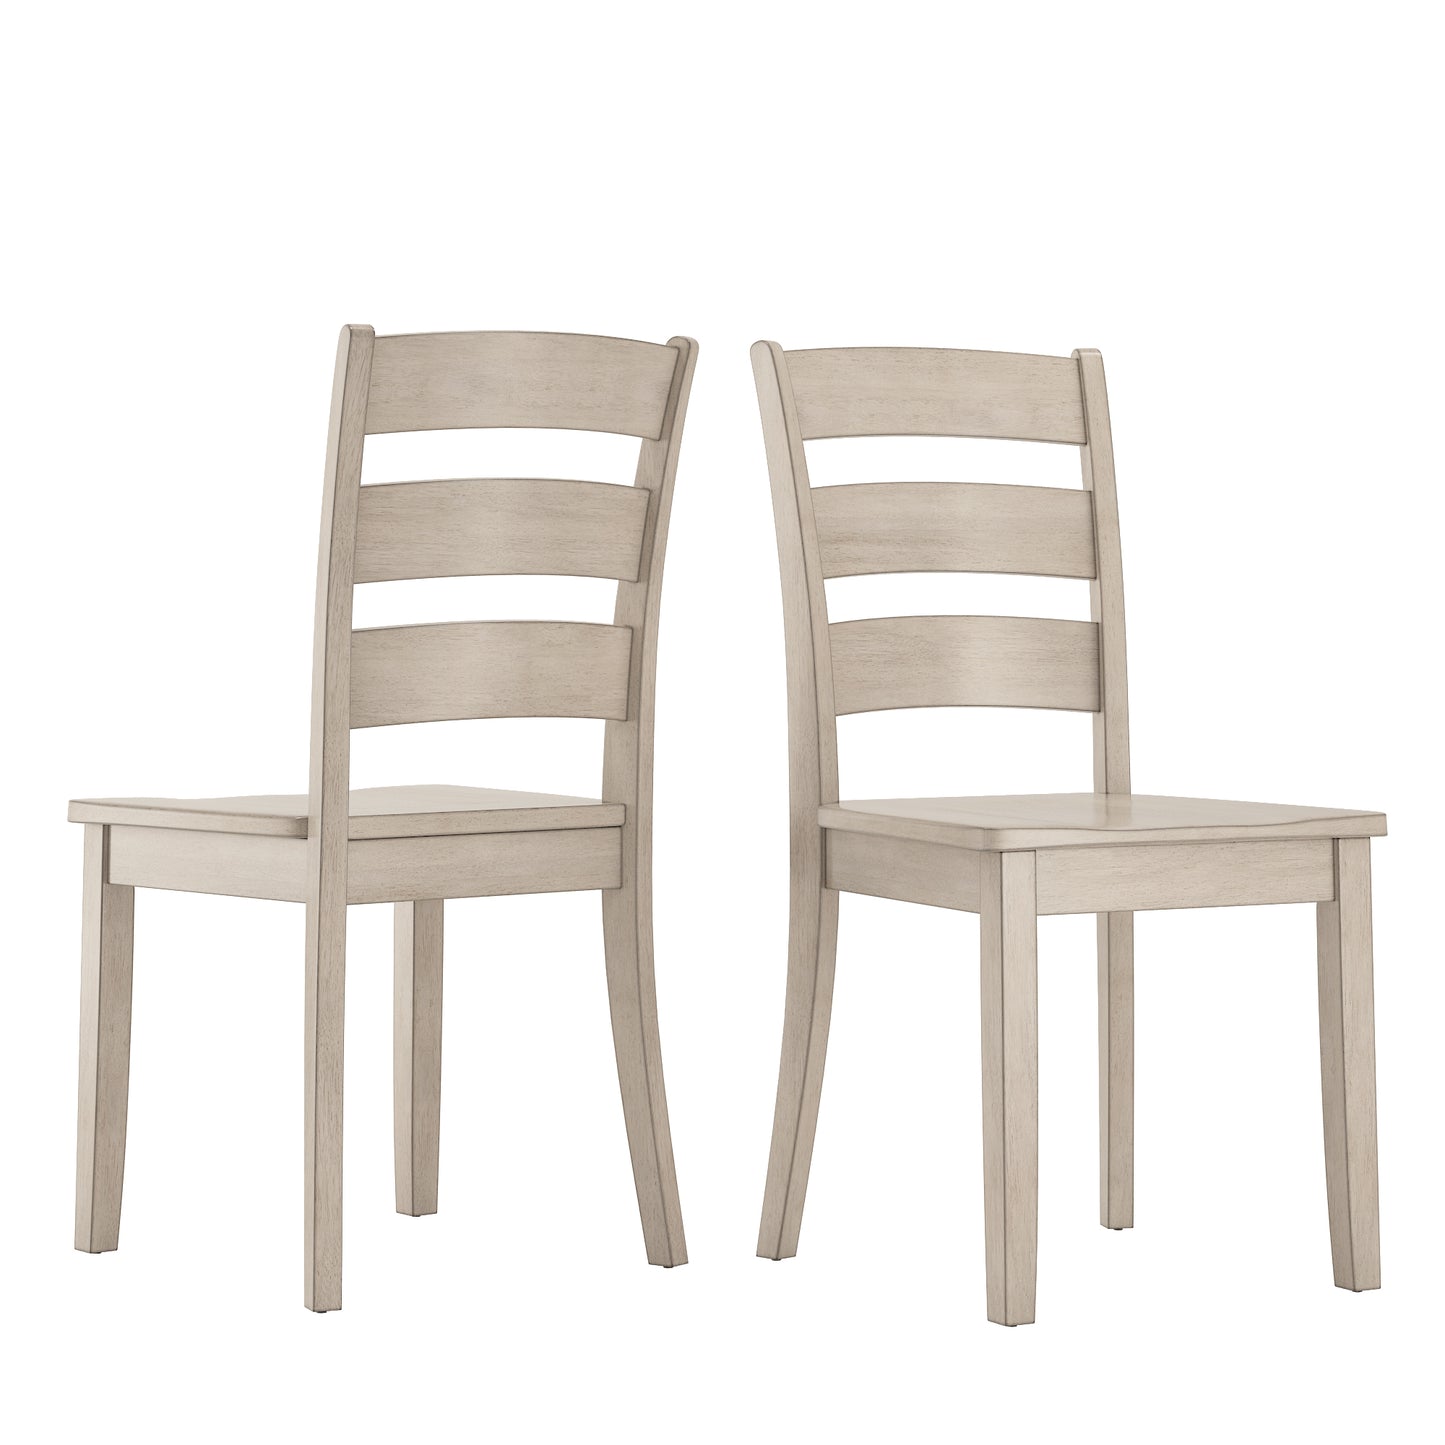 Ladder Back Wood Dining Chairs (Set of 2) - Antique White Finish